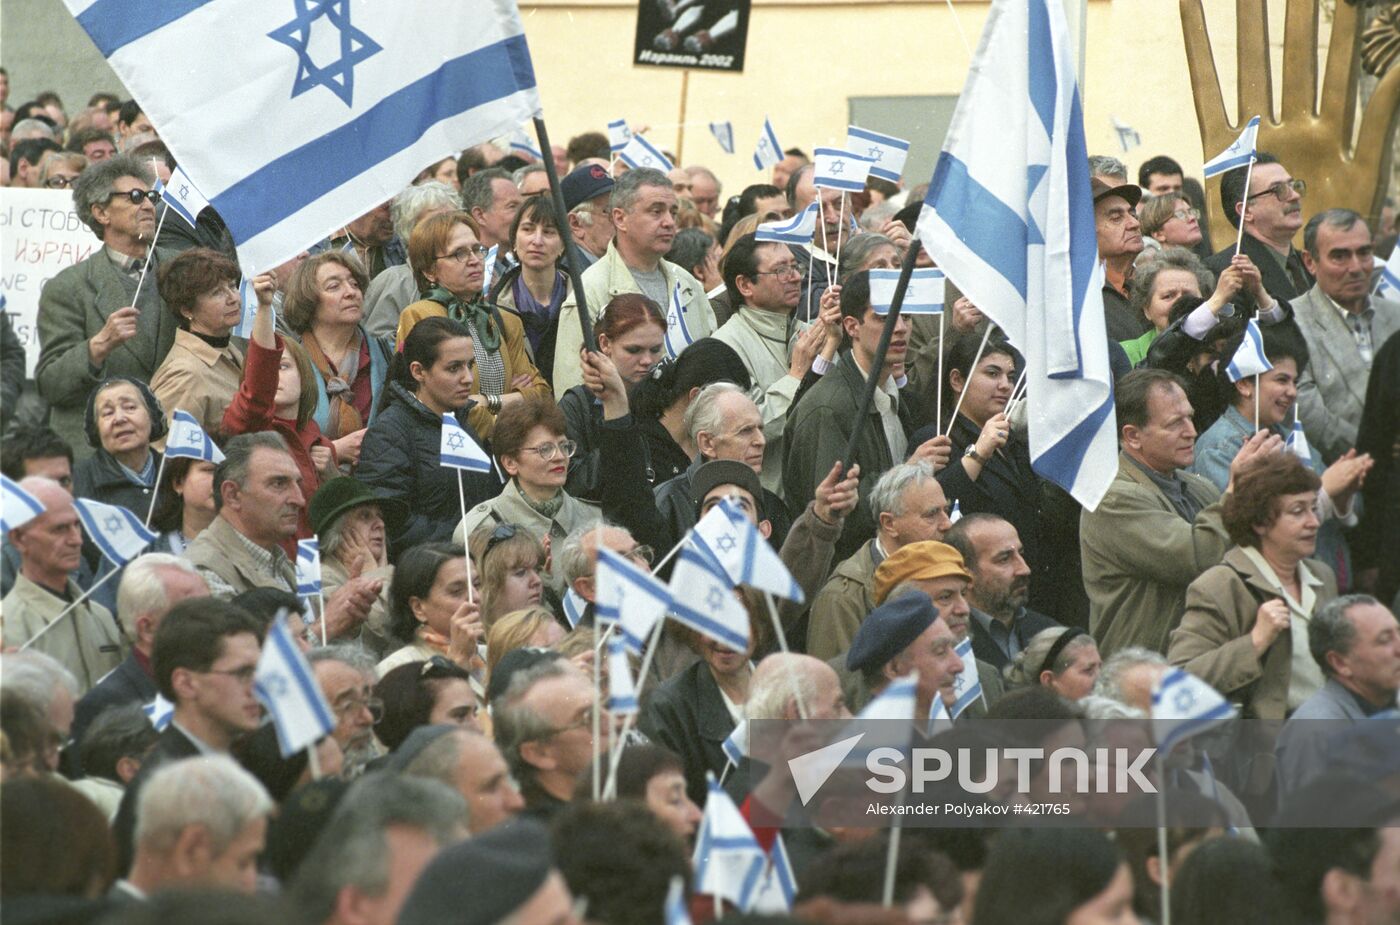 Rally in support of Israel